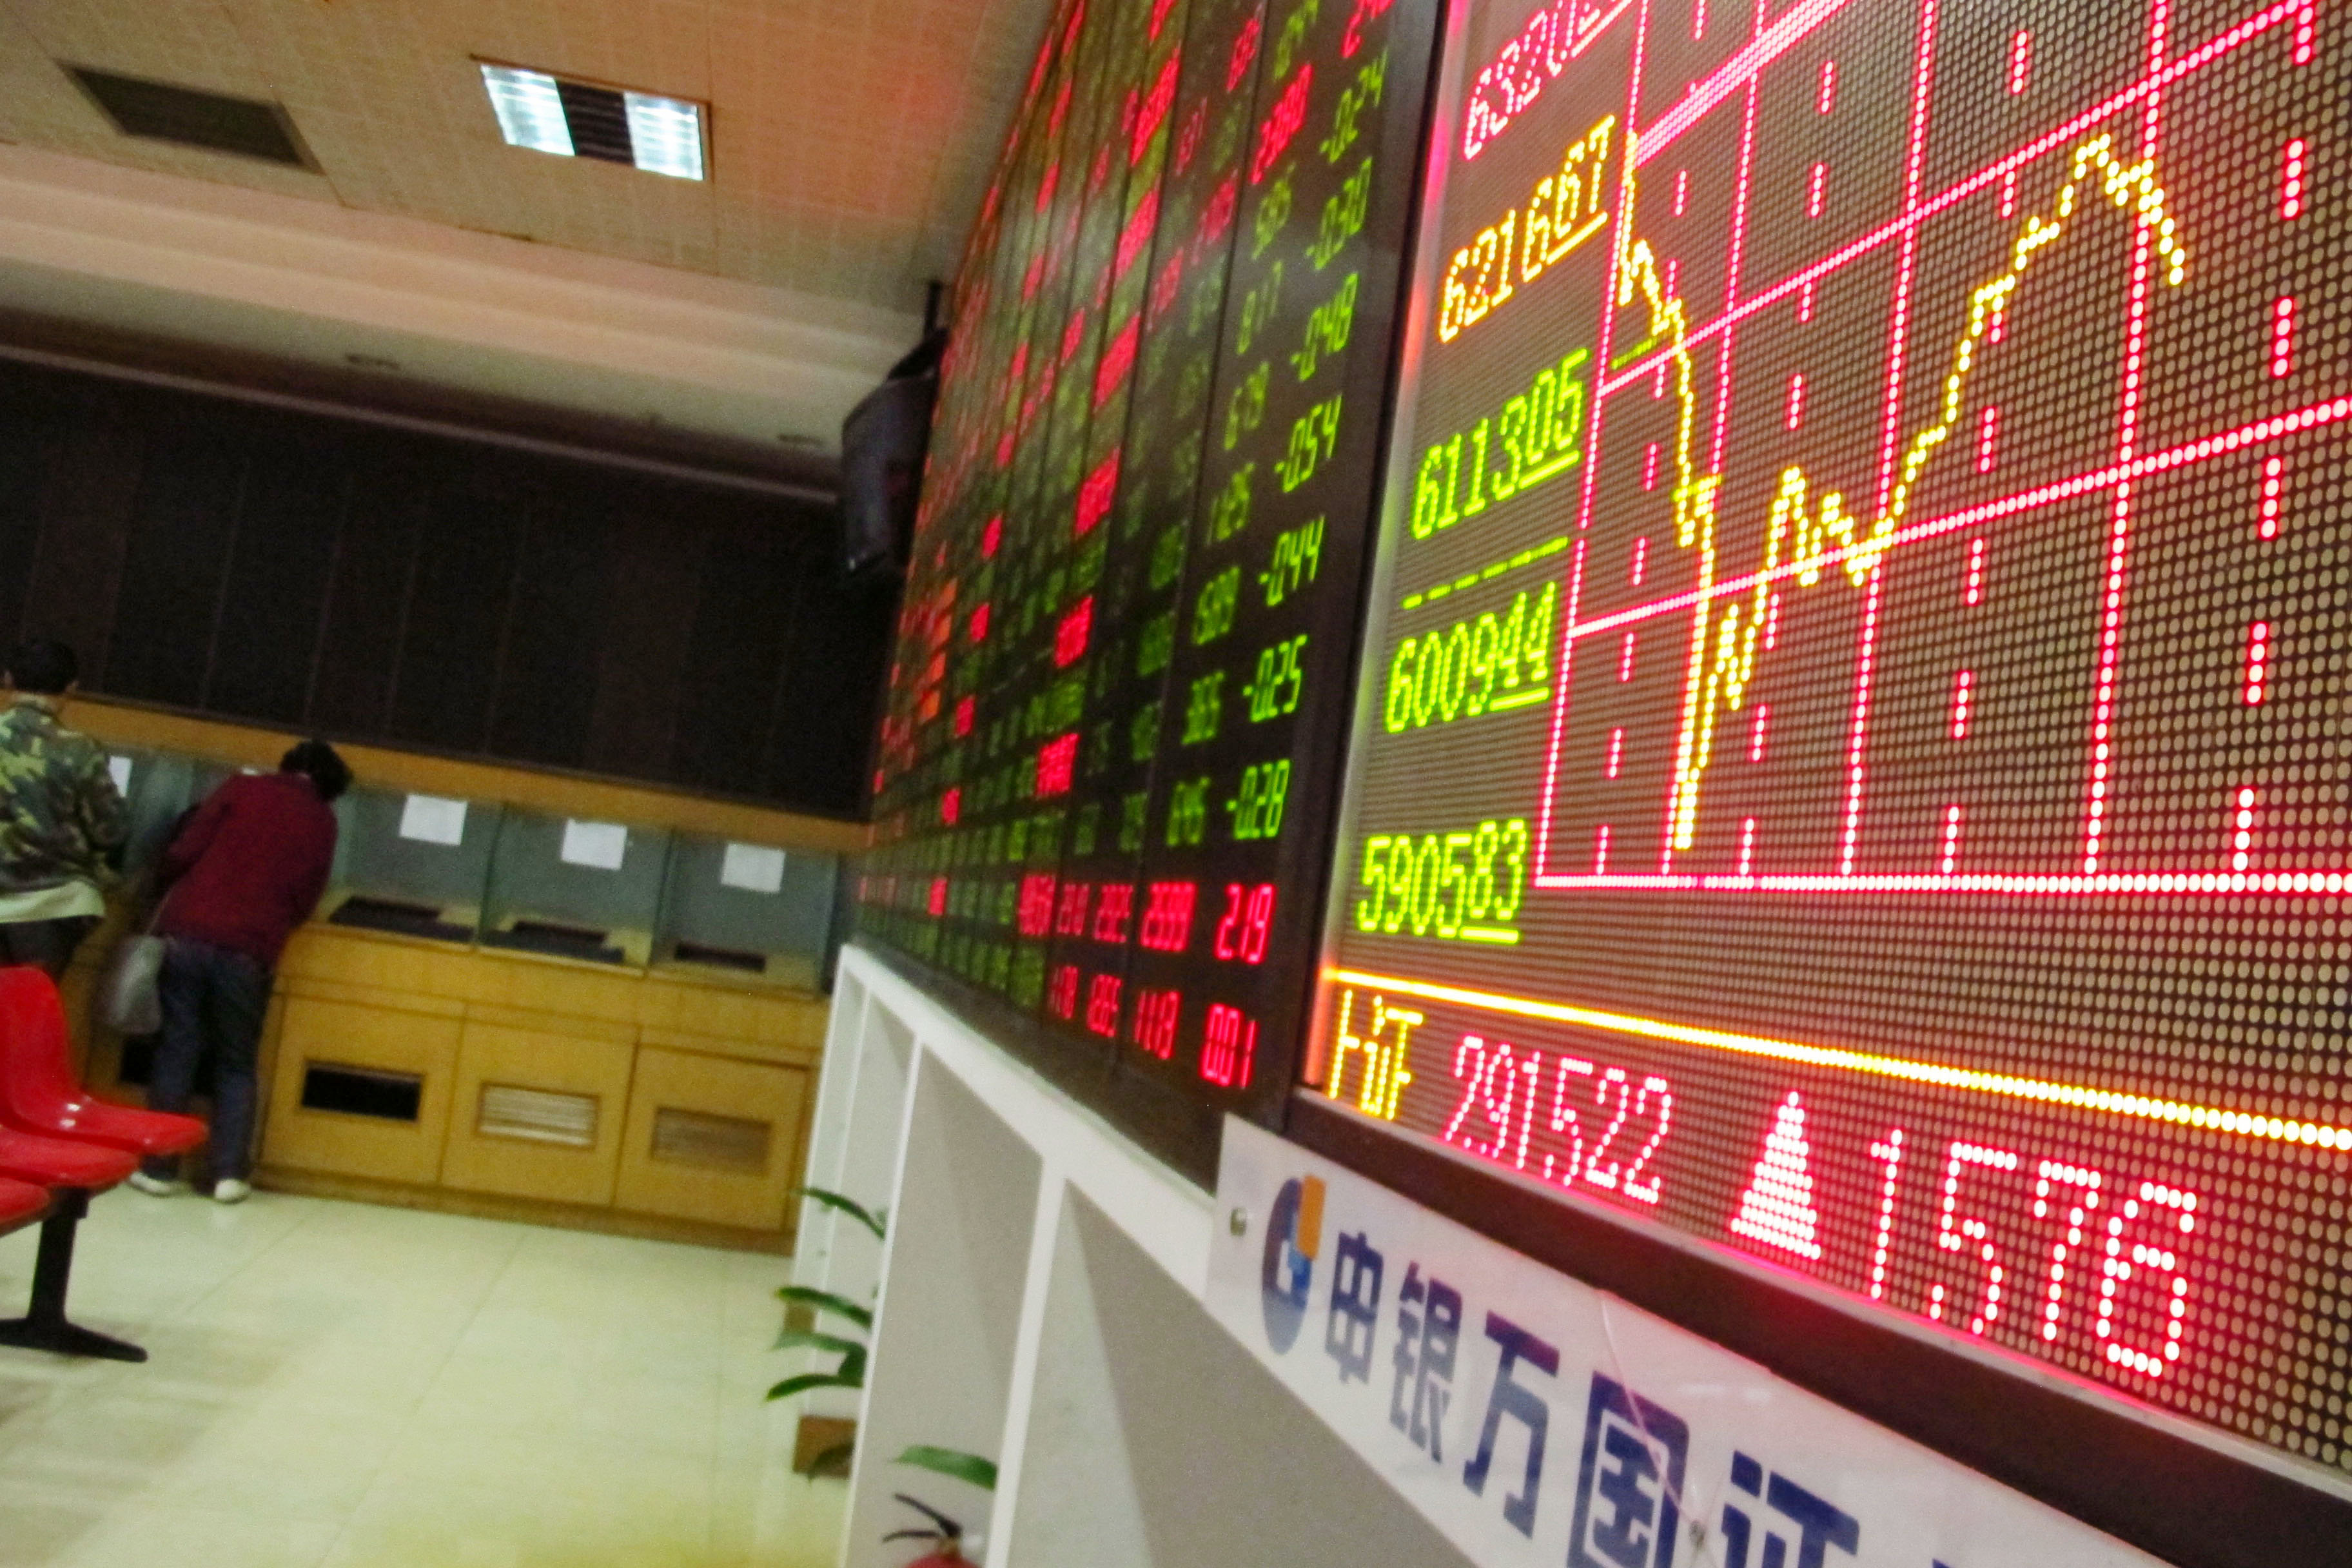 Investors watch the electronic board at a stock exchange hall on December 5, 2014 in Haikou, China. (ChinaFotoPress&mdash;ChinaFotoPress via Getty Images)